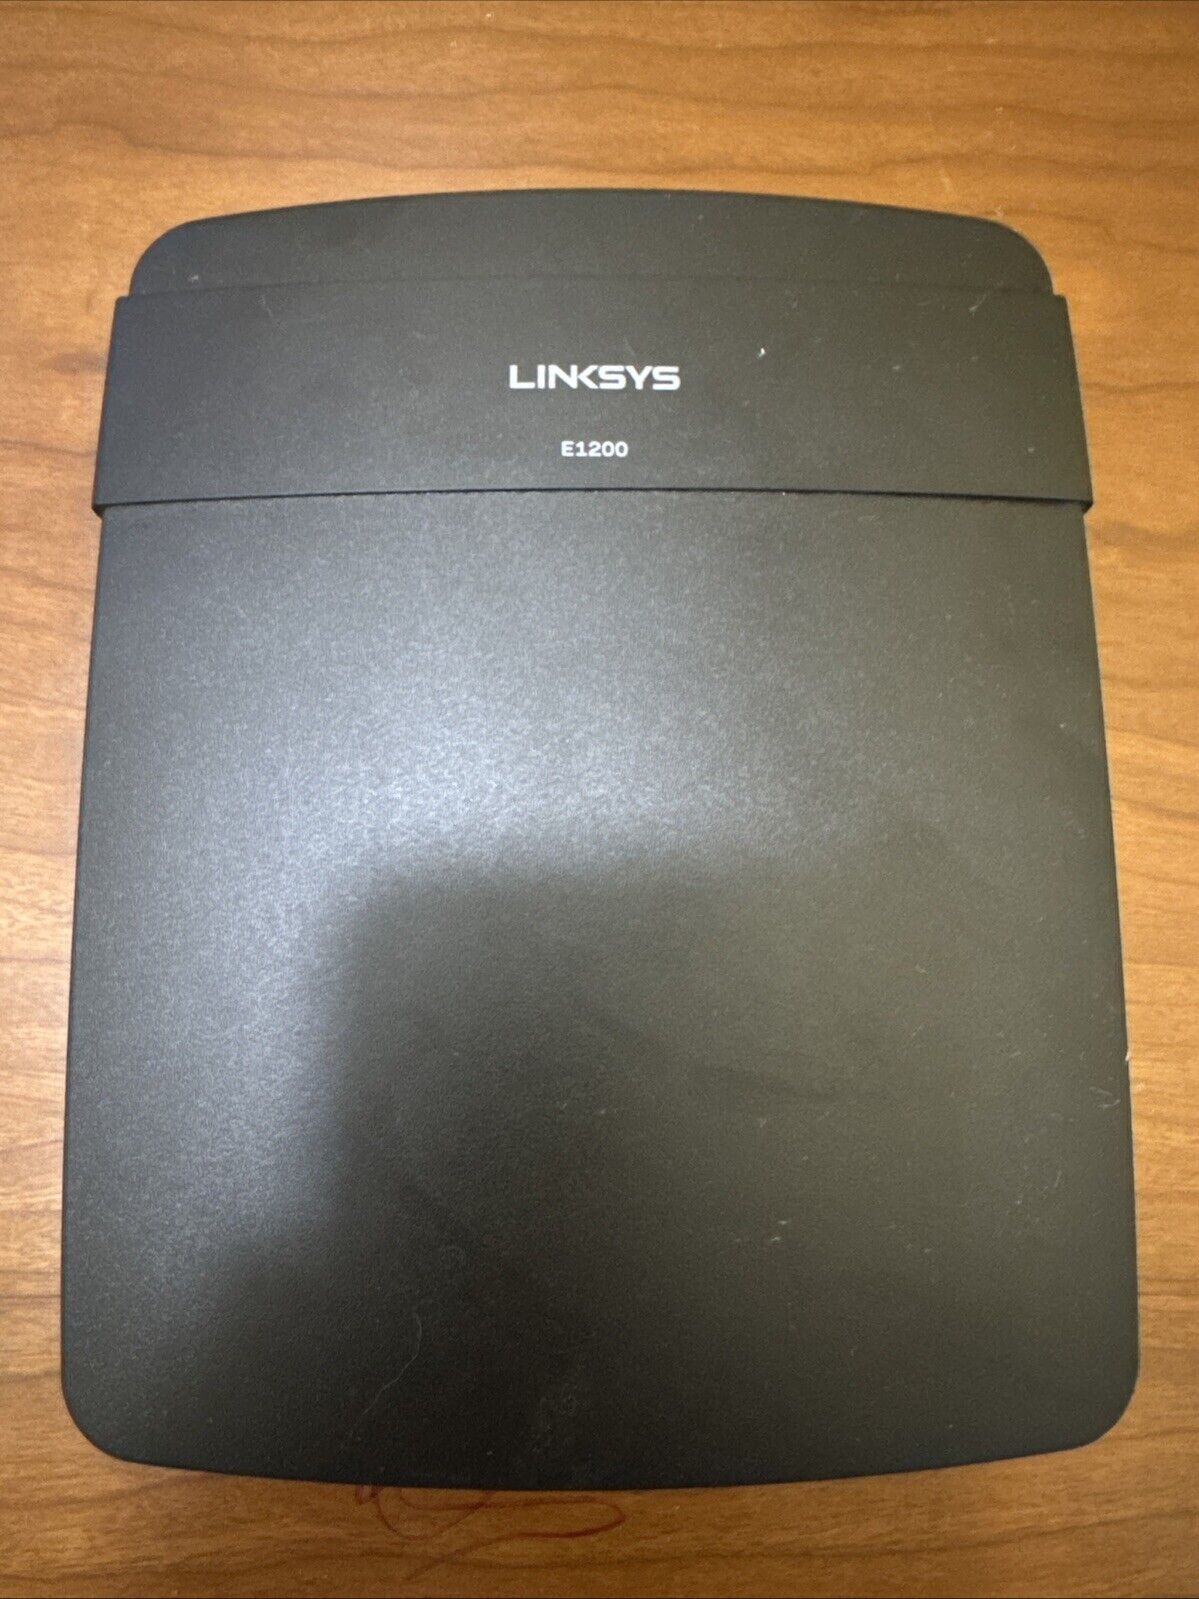 Linksys E1200 300 Mbps 4-Port 10/100 Wireless N Router